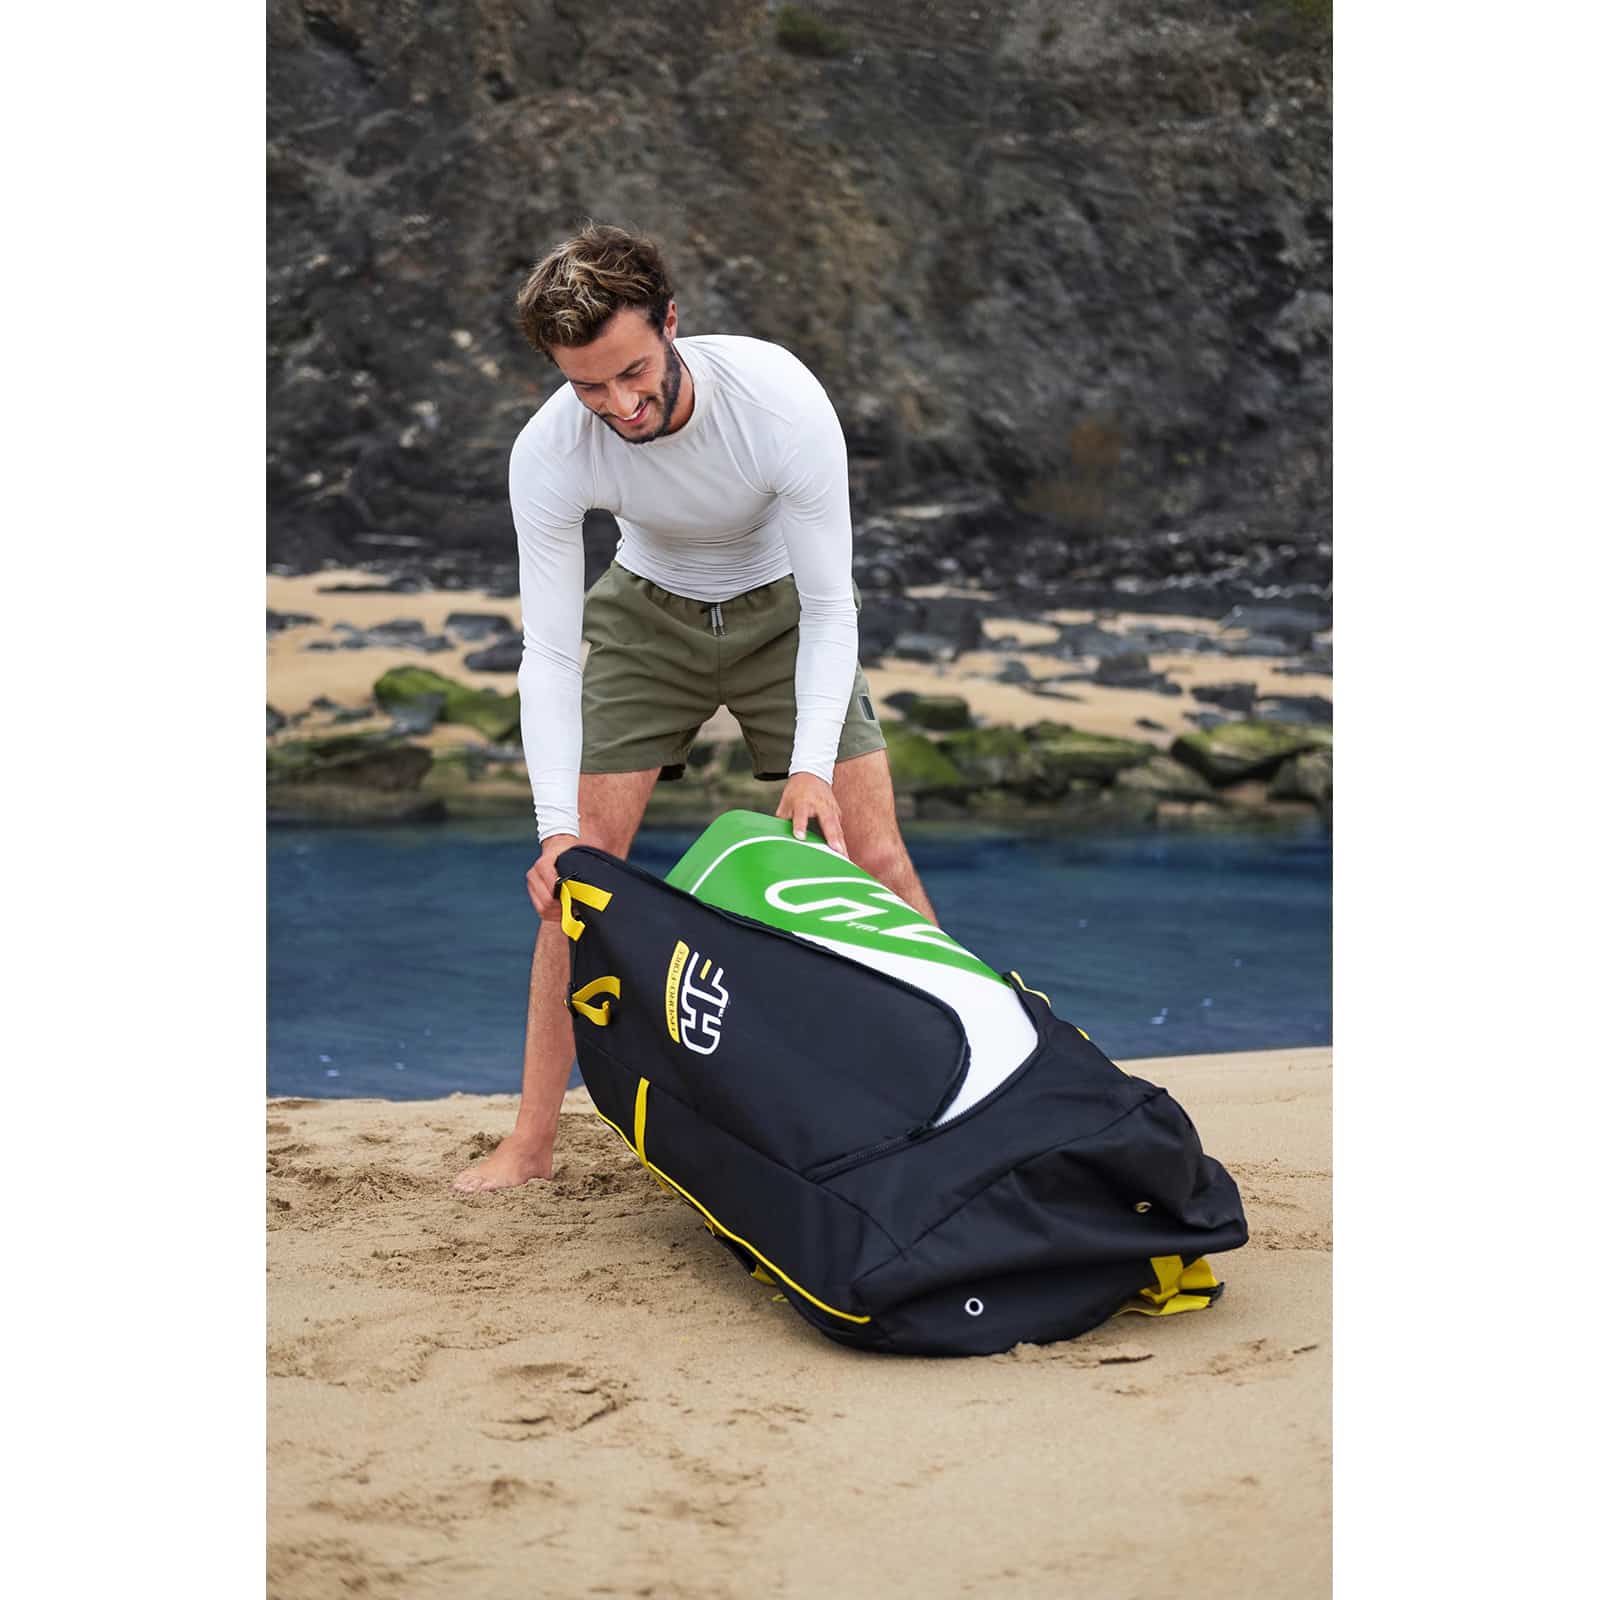 Tabla Paddle Surf Hinchable Bestway Hydro-force Freesoul Tech 340x89x15 Cm Con Remo, Asiento, Bomba  MKP